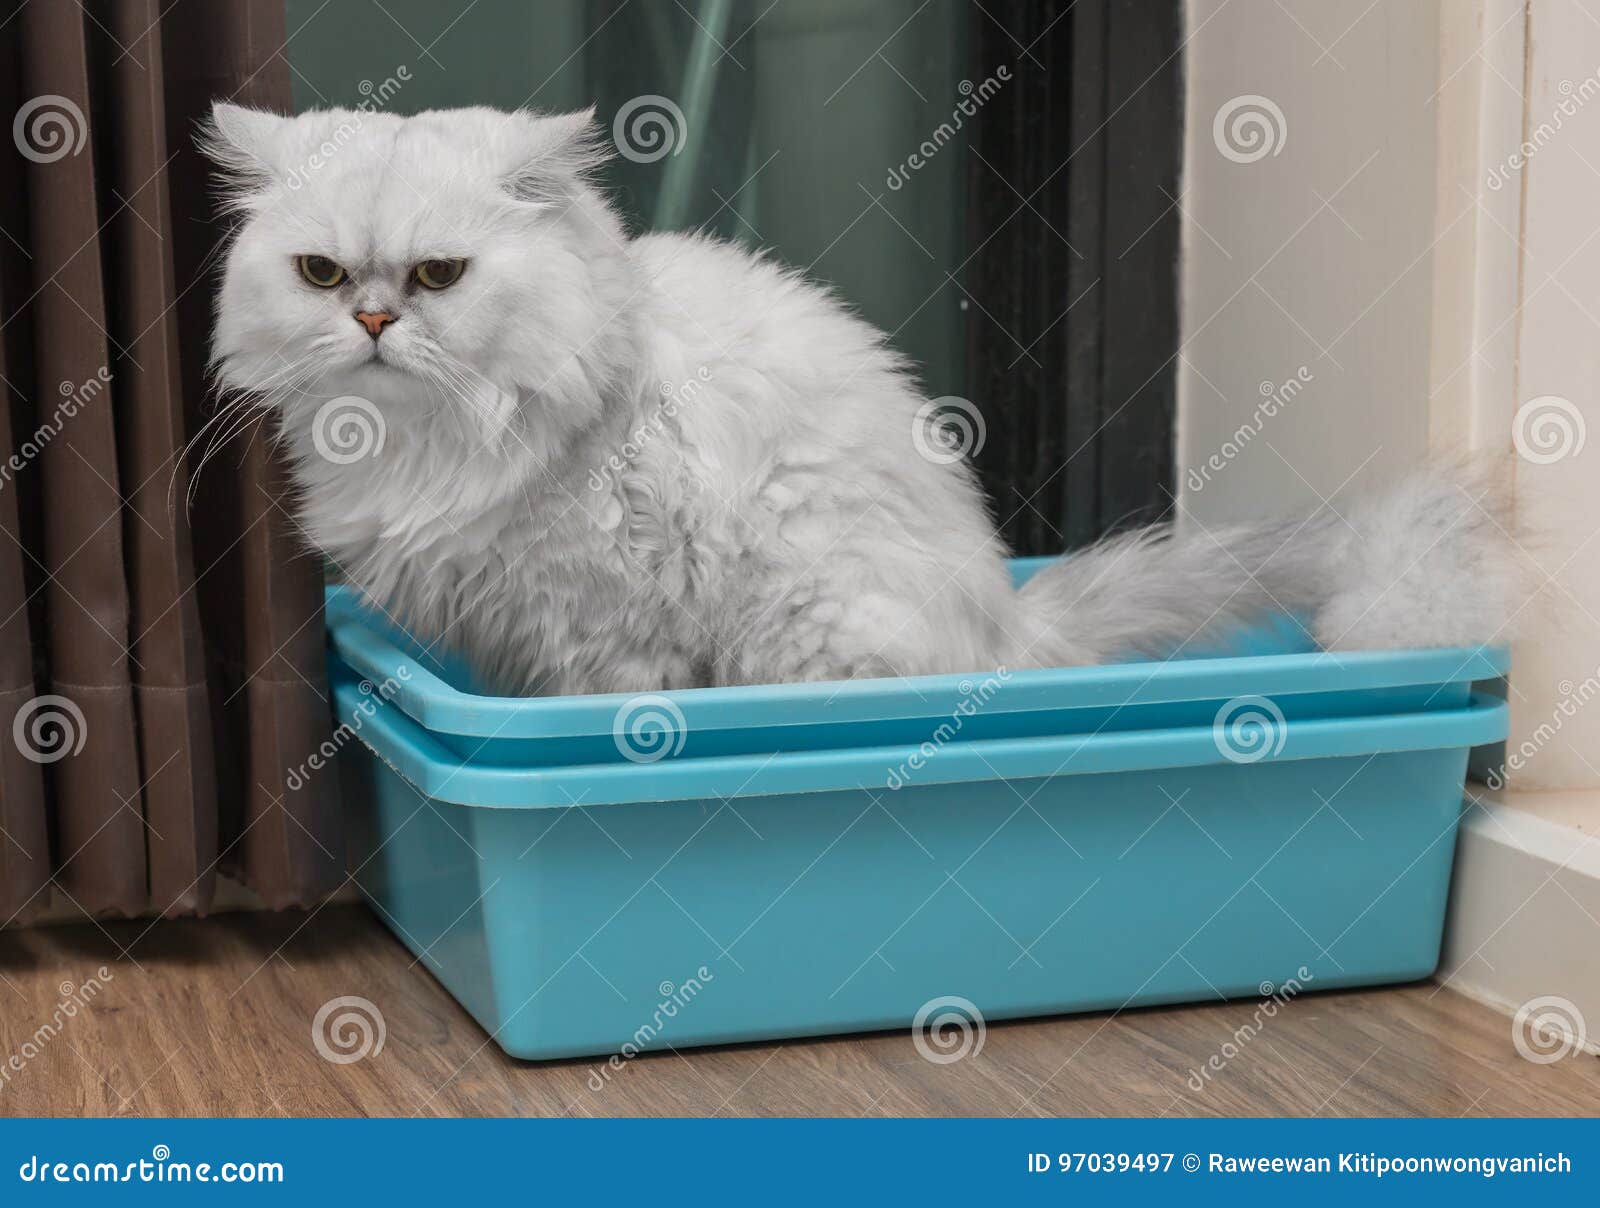 chinchila persian cat using toilet, litter box, for pooping or urinate